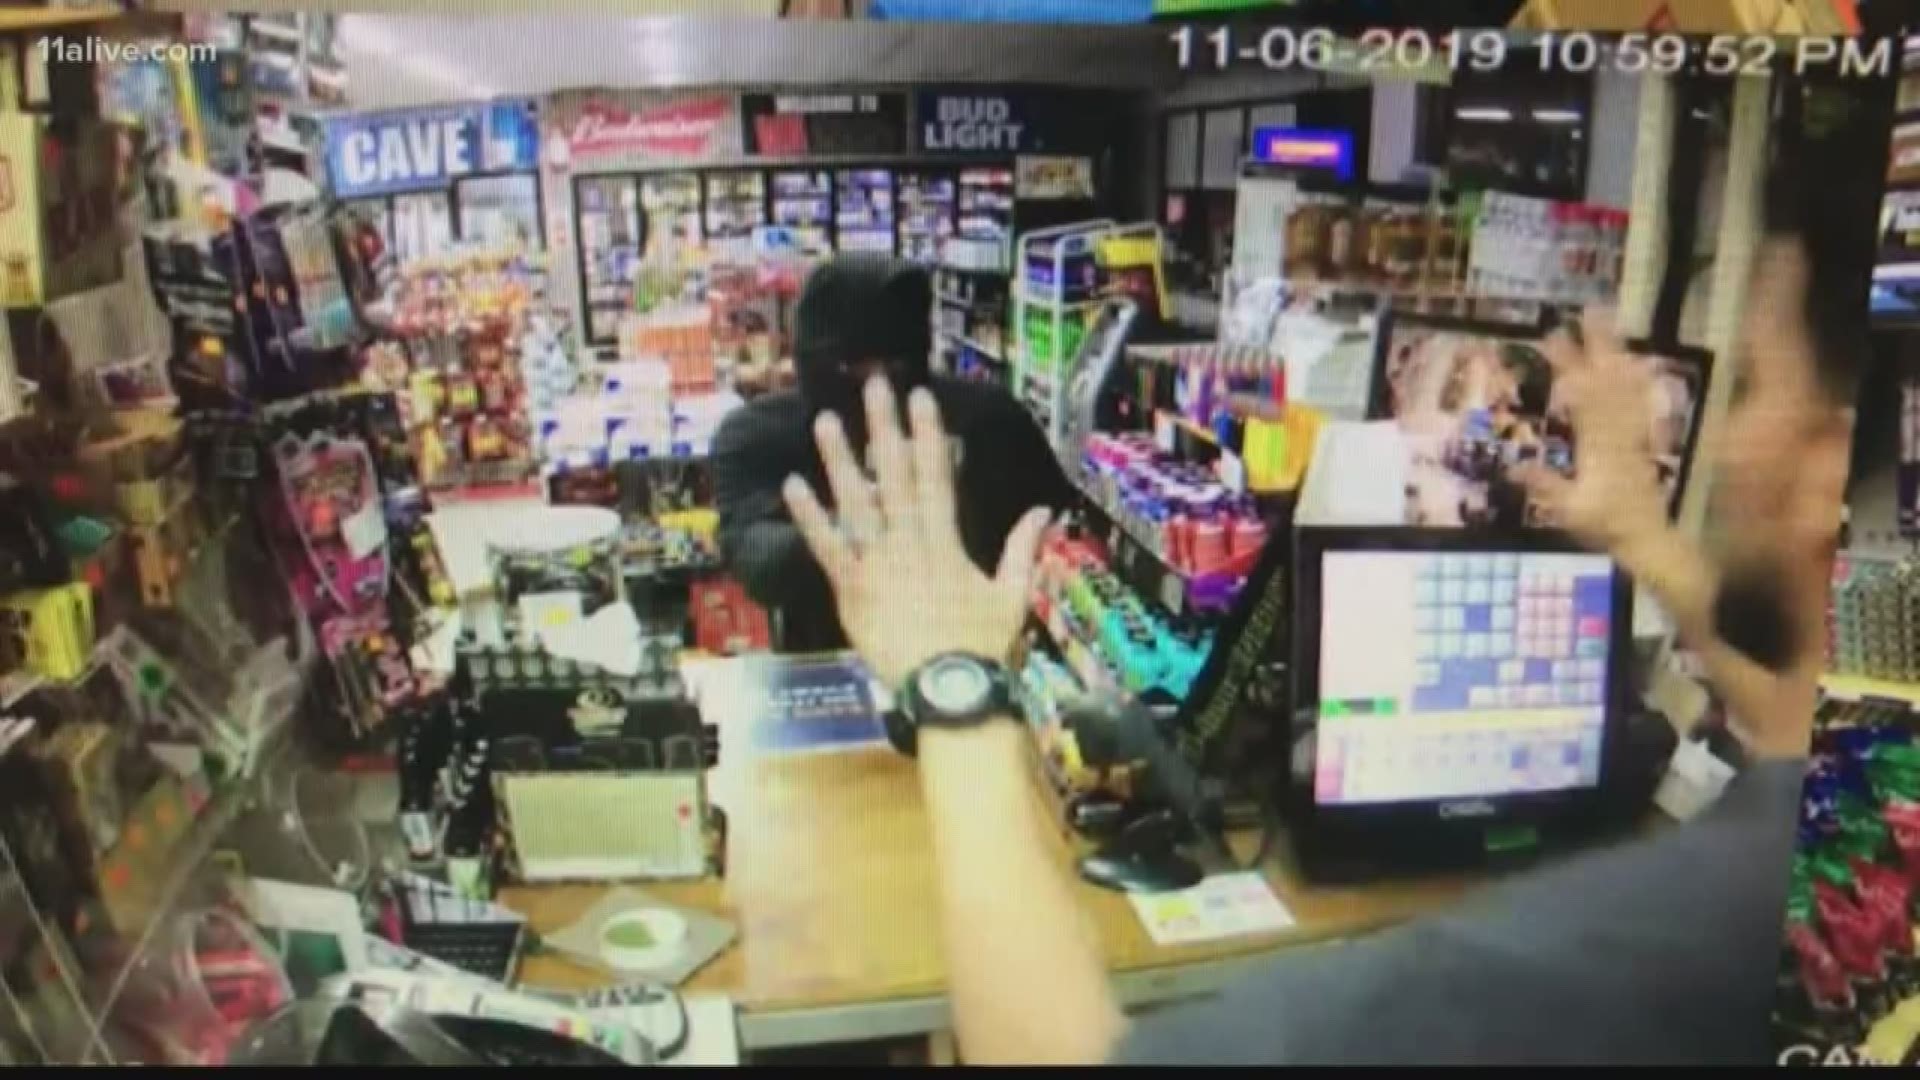 Take a look at the surveillance video